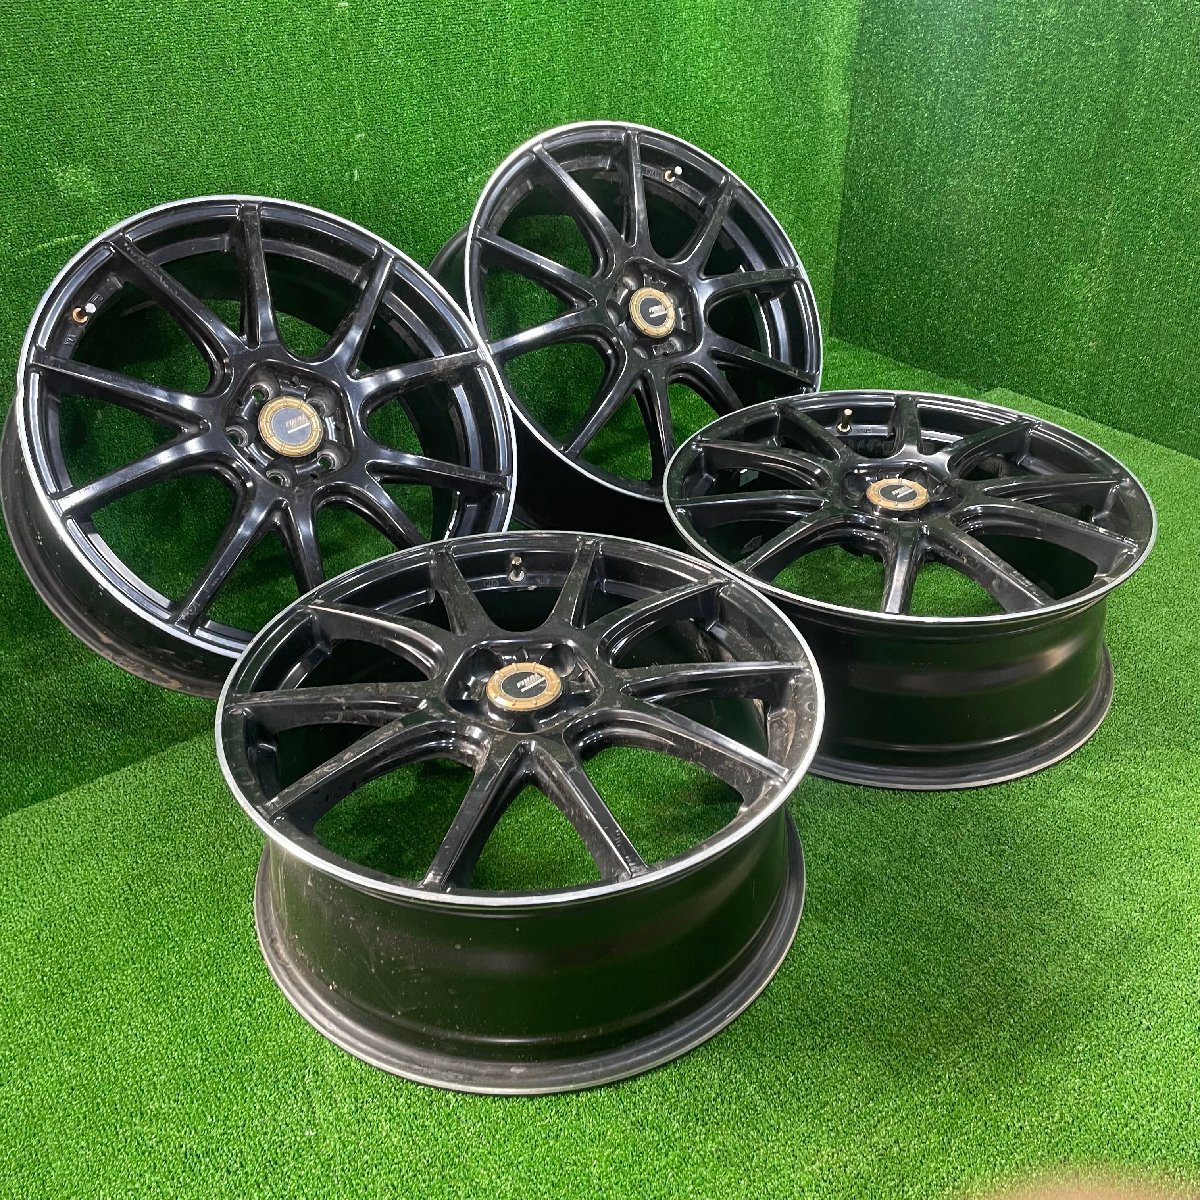 18×7j 5h ＋50 100 FINAL SPEED A-TECH ファイナルスピード エーテック 希少 アルミ ホイール ホイル 18 インチ in 5穴 pcd 4本 菅18-518_画像1